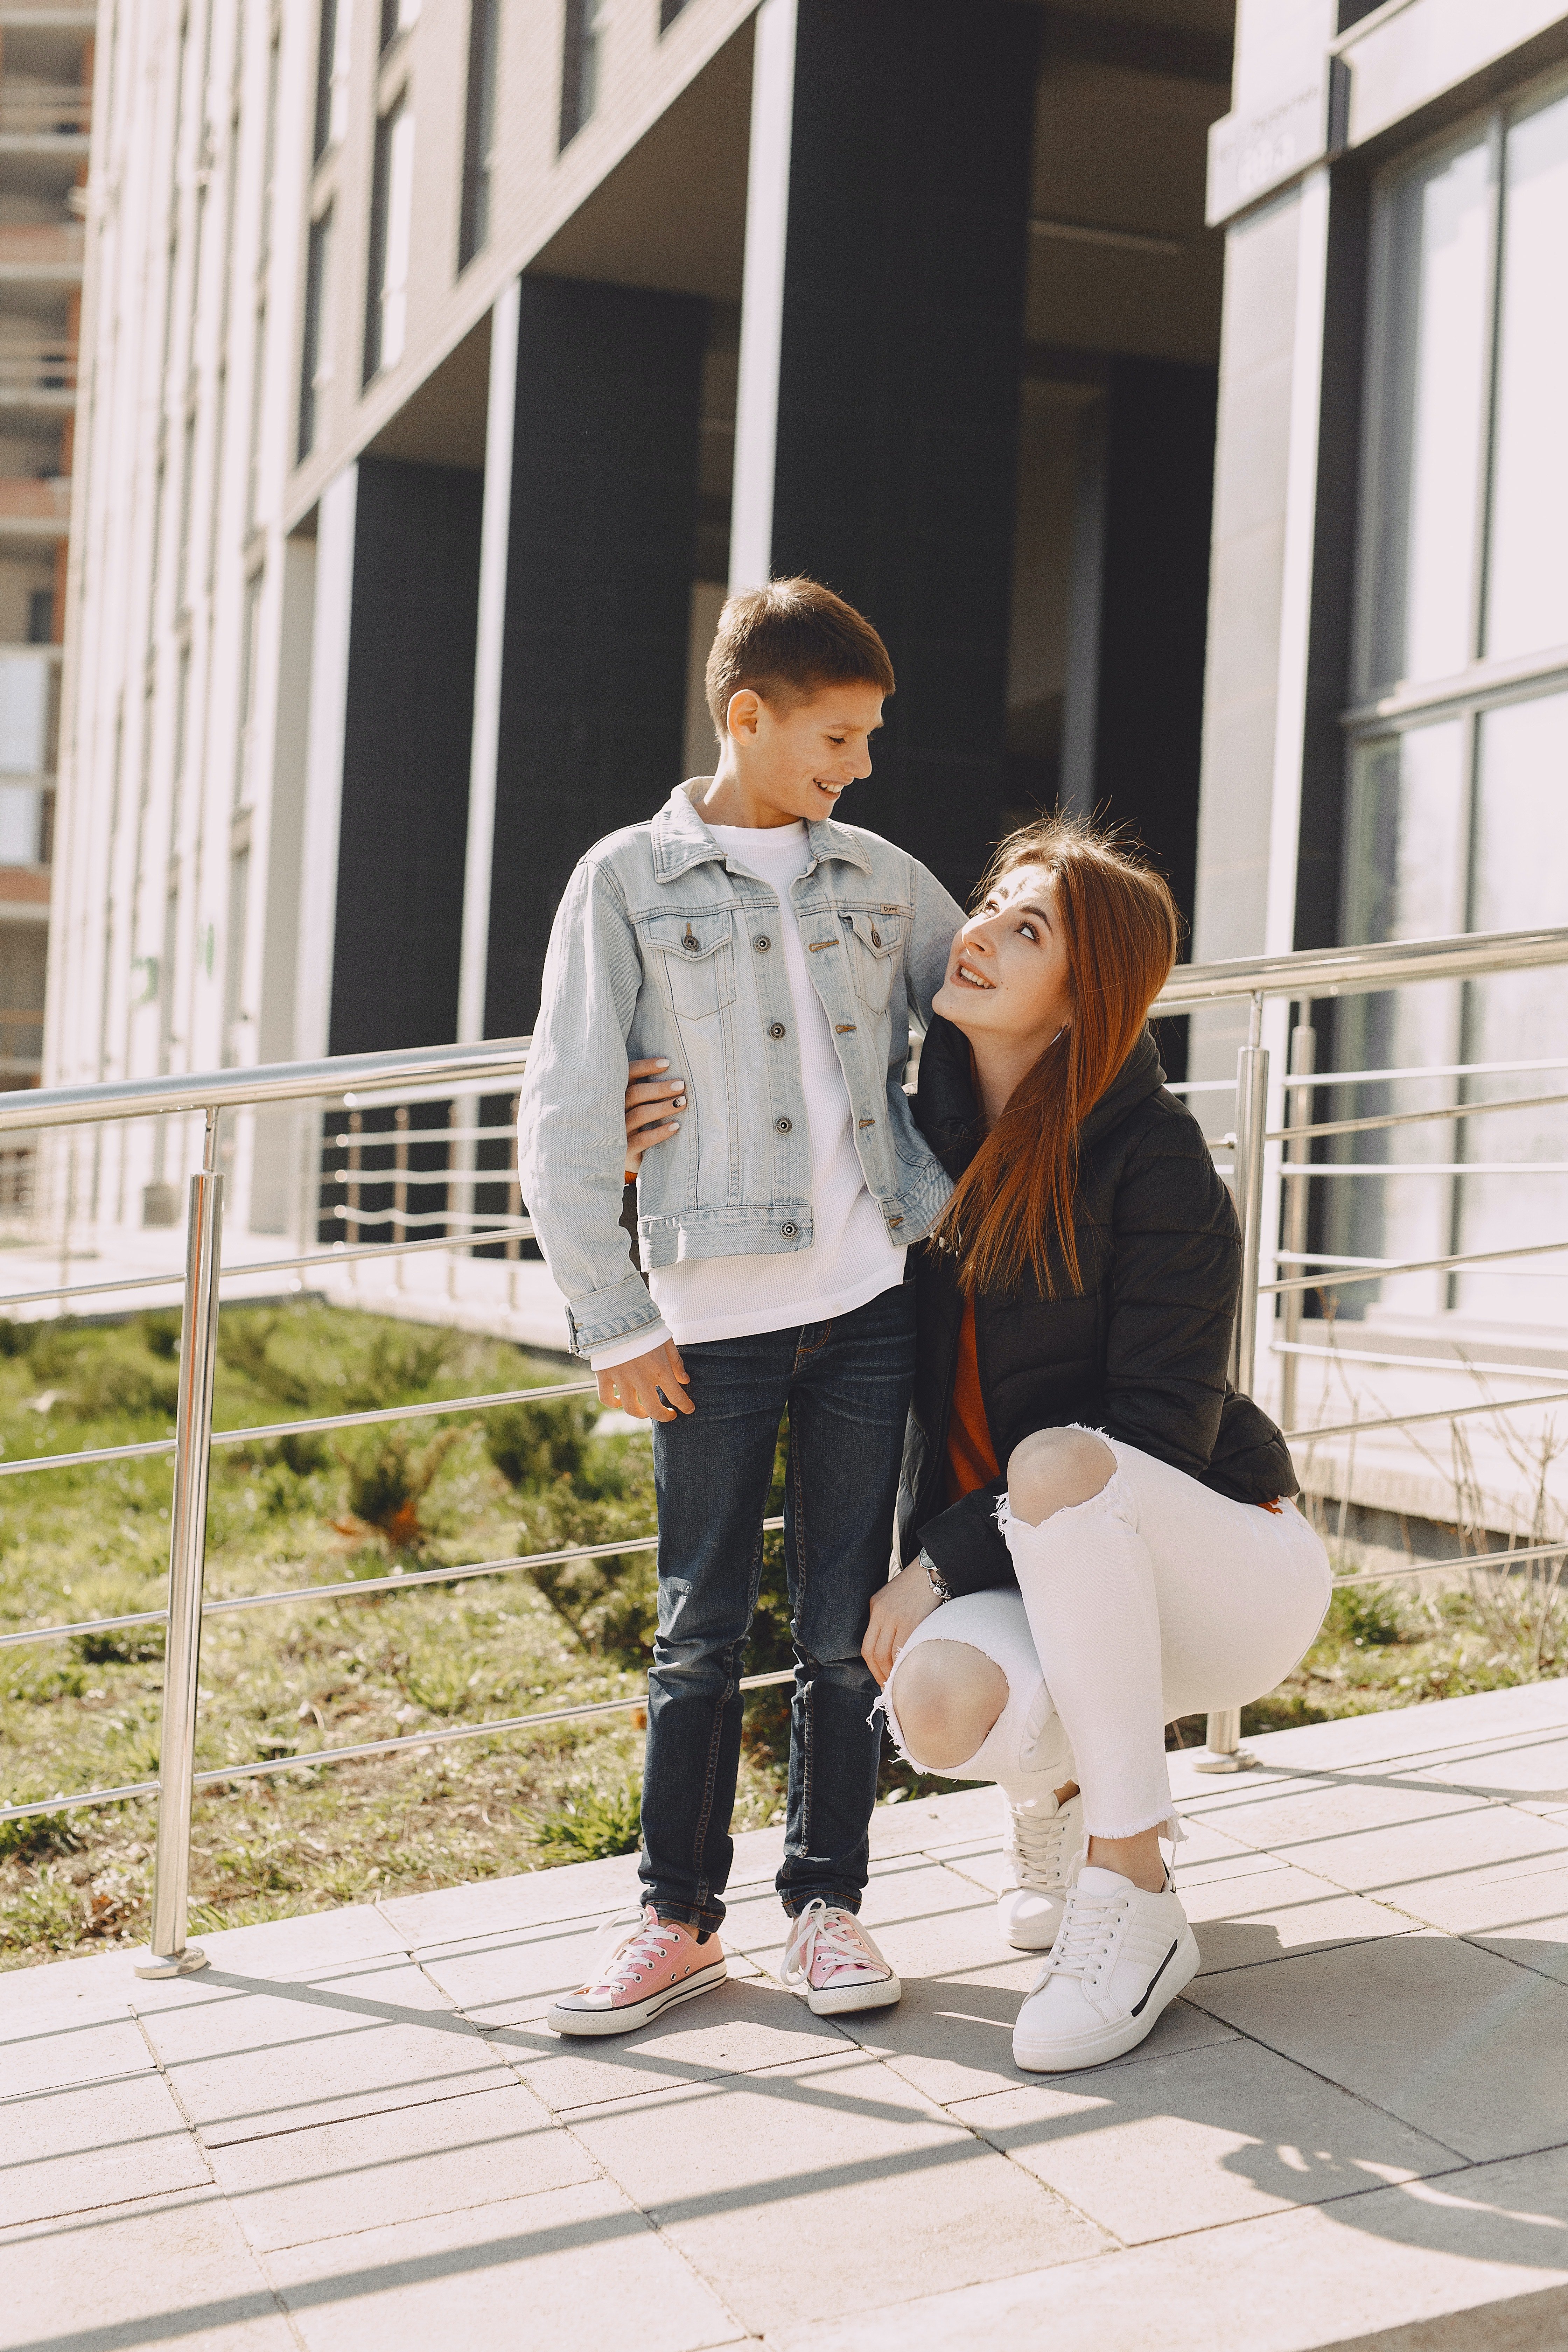 Happy mother and son hugging on street | Photo: Pexels